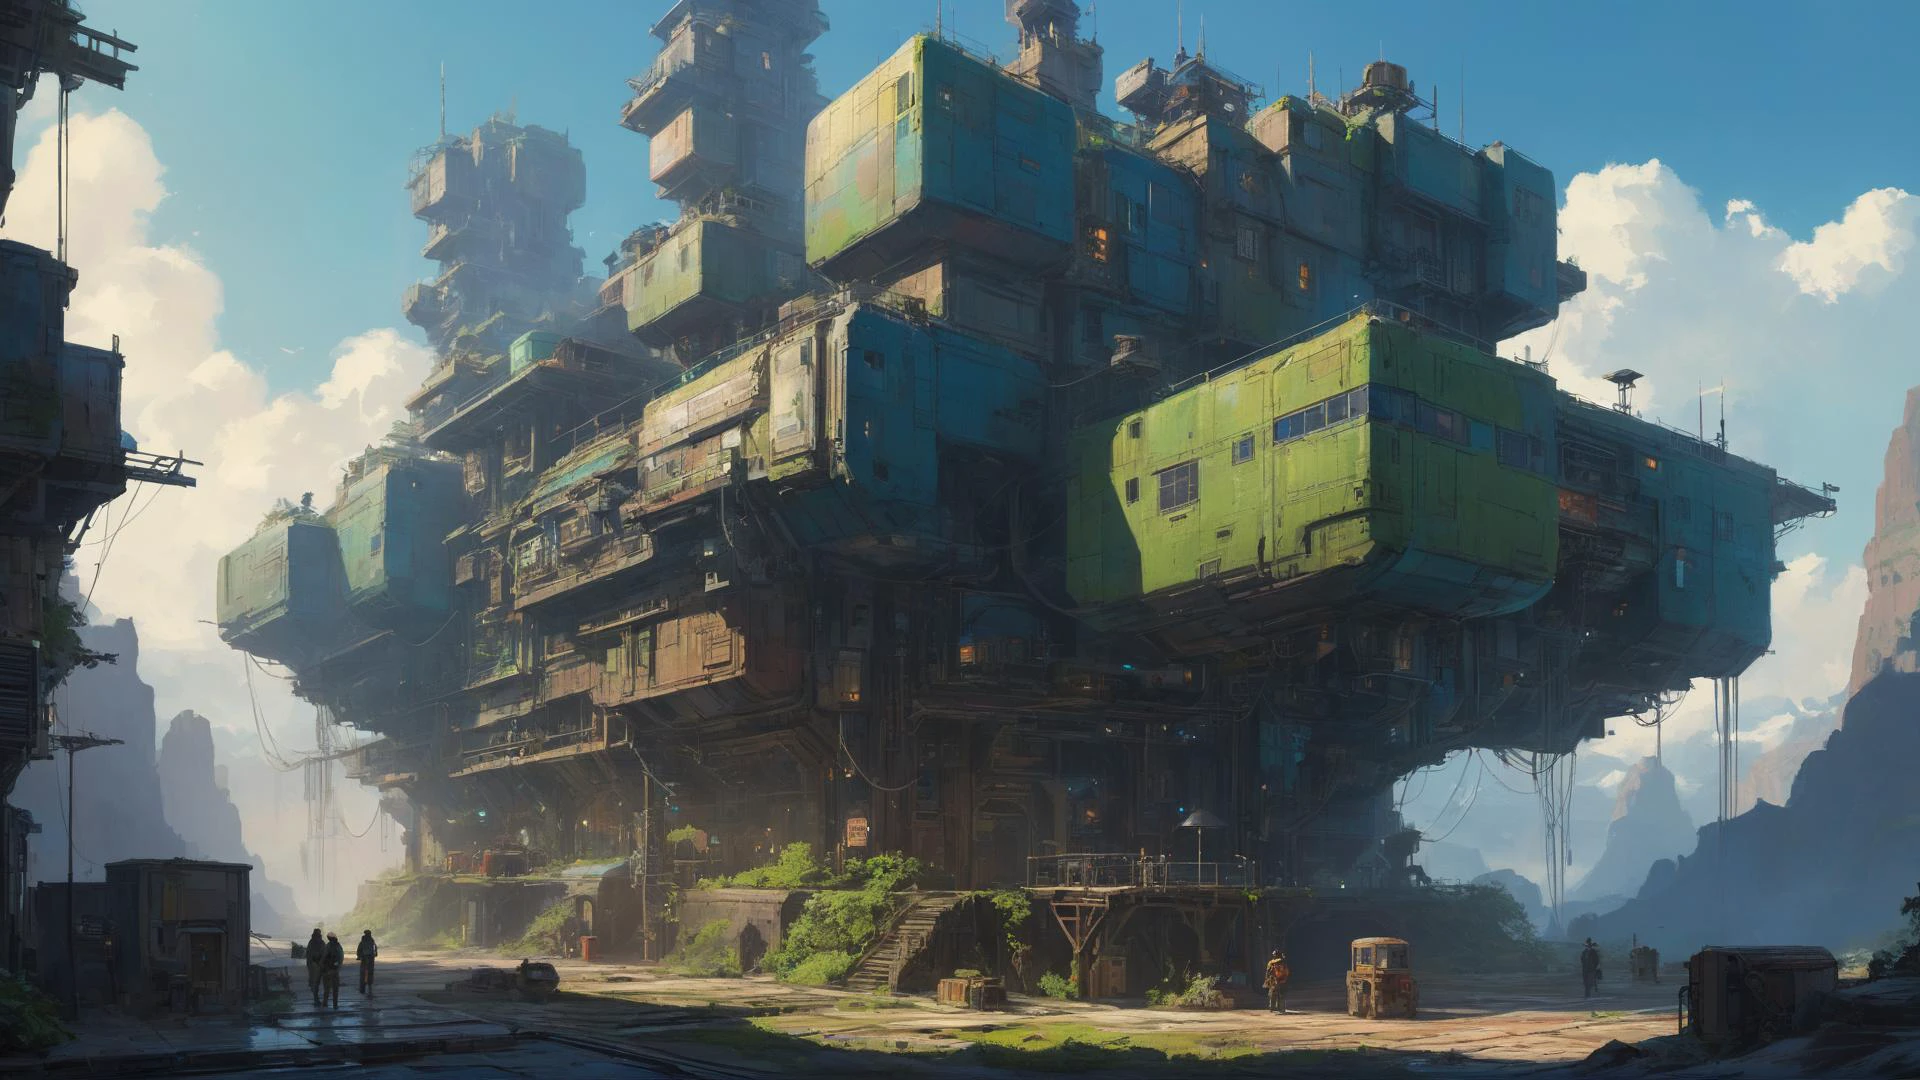 SK_DIGITALART, painting of a cyberpunk megastructure outside of time, an exotic distant world, by Ian McQue, 
highly impressive & realistic, Hyper-detailed, Insane Details, Intricate Details, Cinematics, Editorial Art, Tilt Blur, Super-Resolution, Megapixels, Unreal Engine 5, Studio Lighting, Volumetric, Optical, Diffusion Glowing, Shadows, Proportions, Rough, Shimmery, Ray Tracing Reflections, Glossy, Lumen Reflections, Screen Space Reflections, Diffraction Rating, Chromatic Aberration, GB Shift, Ray Tracing, Ray Tracing Ambient Occlusion Anti-Ali asing, Post-Processing, Post-Production, Cel Shading, Tone Mapping, Incredibly Detailed and Intricate, Hypermaximalist, Sleek, Hyper Realistic, Super Detailed, Dynamic Pose, Hyperrealism, HDI, 8k  dramatic lighting, dark colors, wide angle view, panorama view, dominant colors Rich Blue and Girl Scout Green, 
